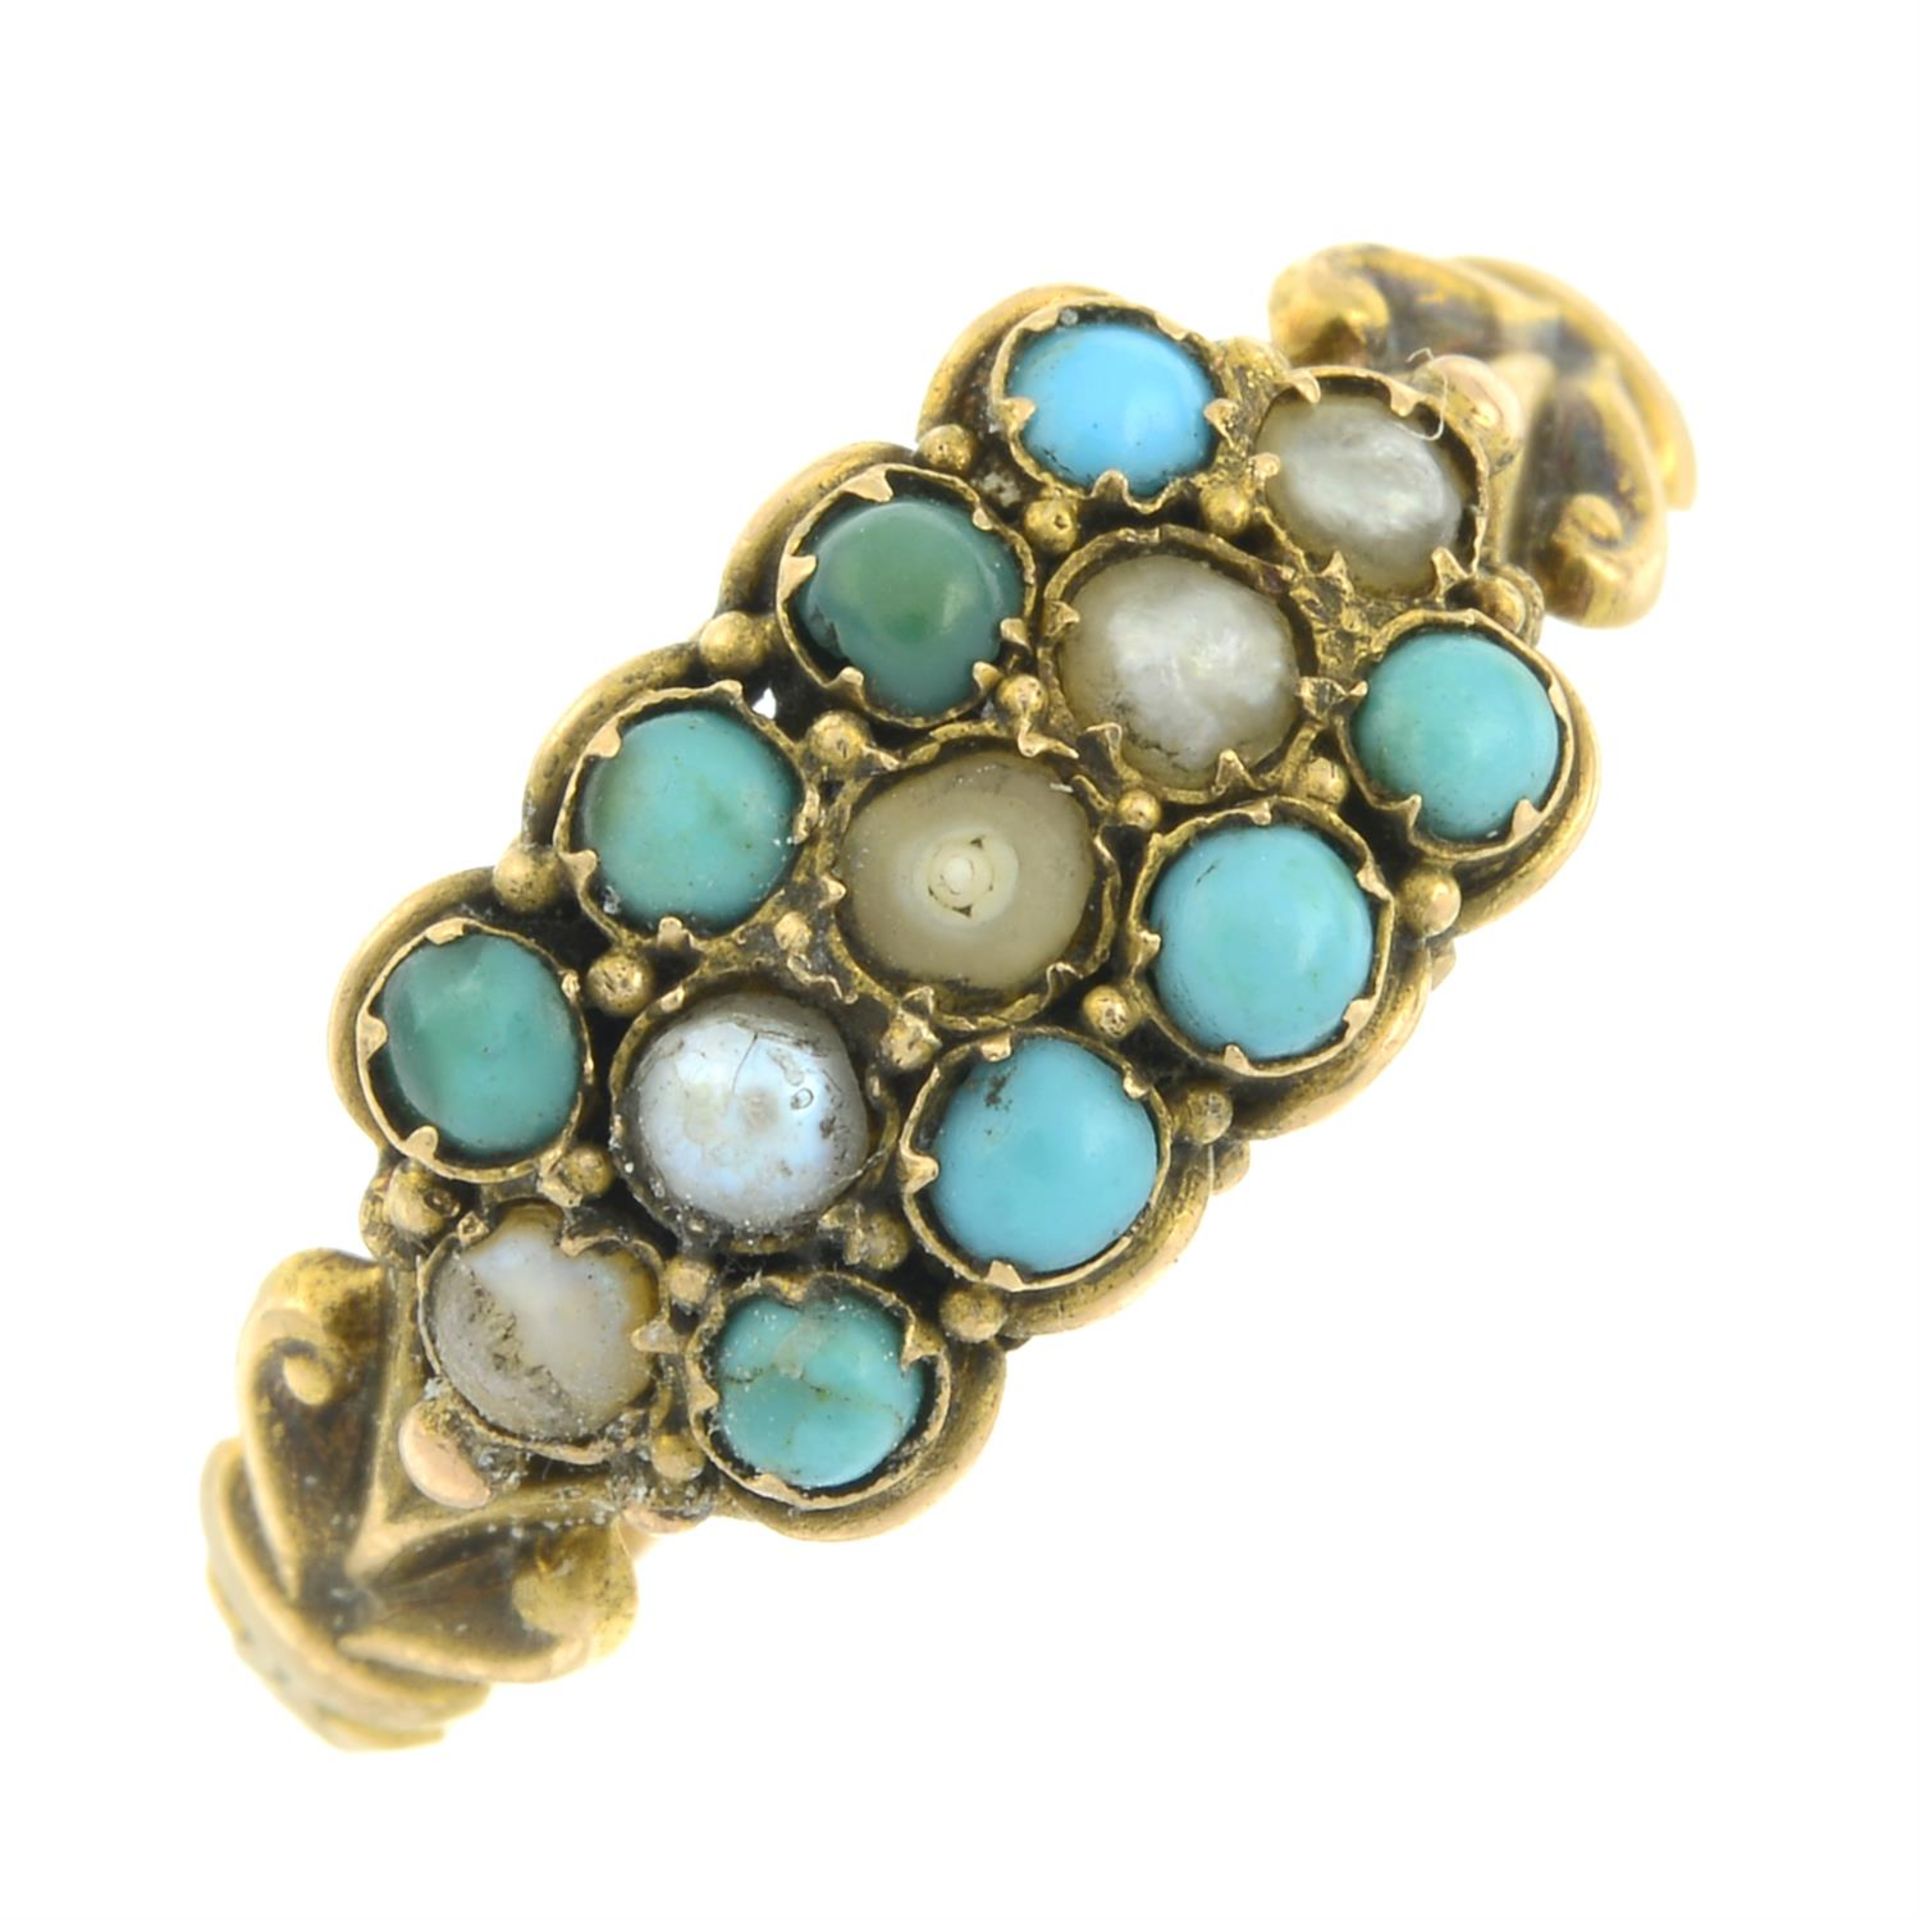 A mid Victorian 15ct gold turquoise and split pearl ring.